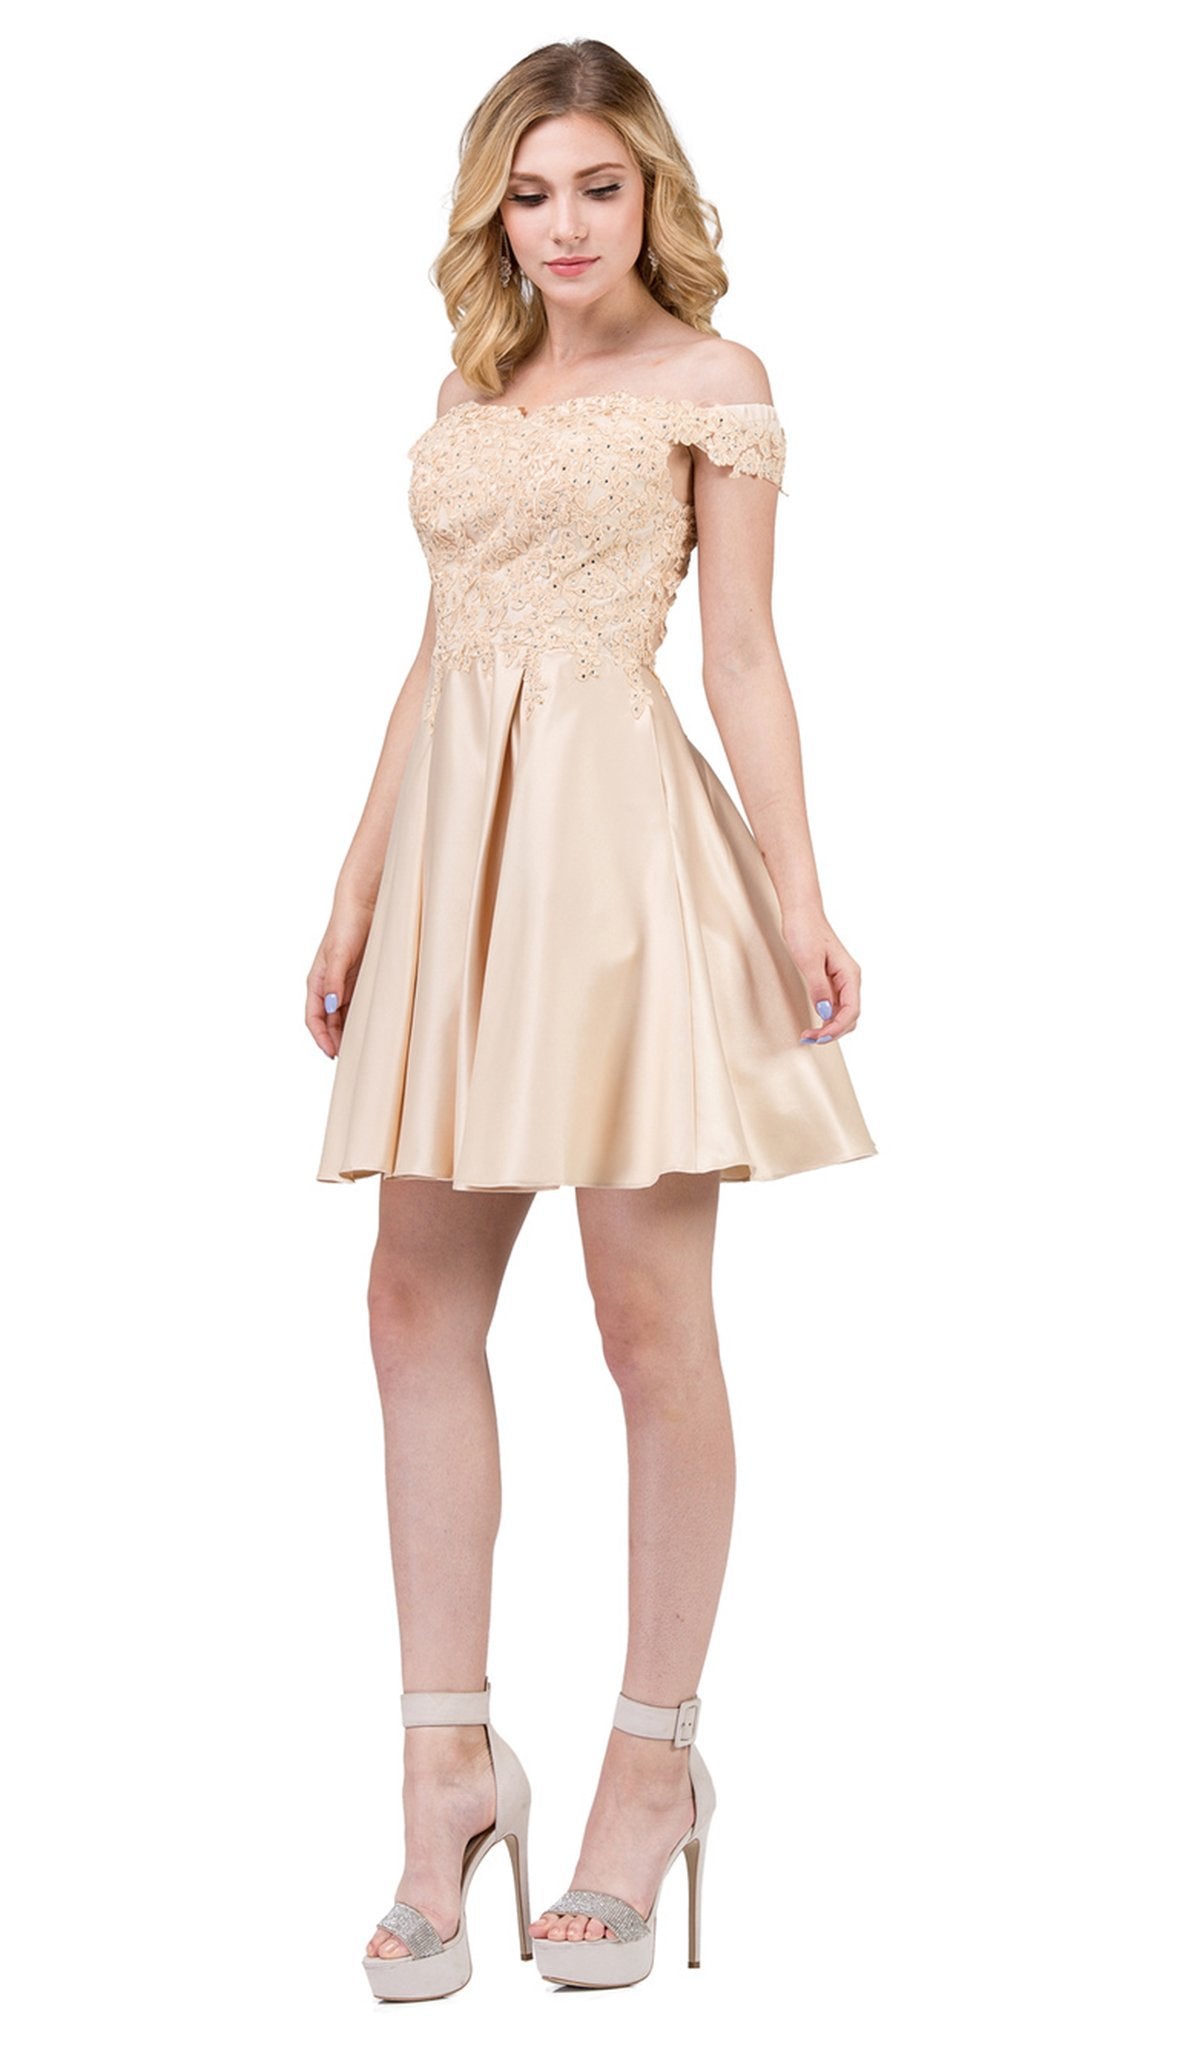 Dancing Queen - 3029 Off-Shoulder A-Line Homecoming Cocktail Dress in Neutral